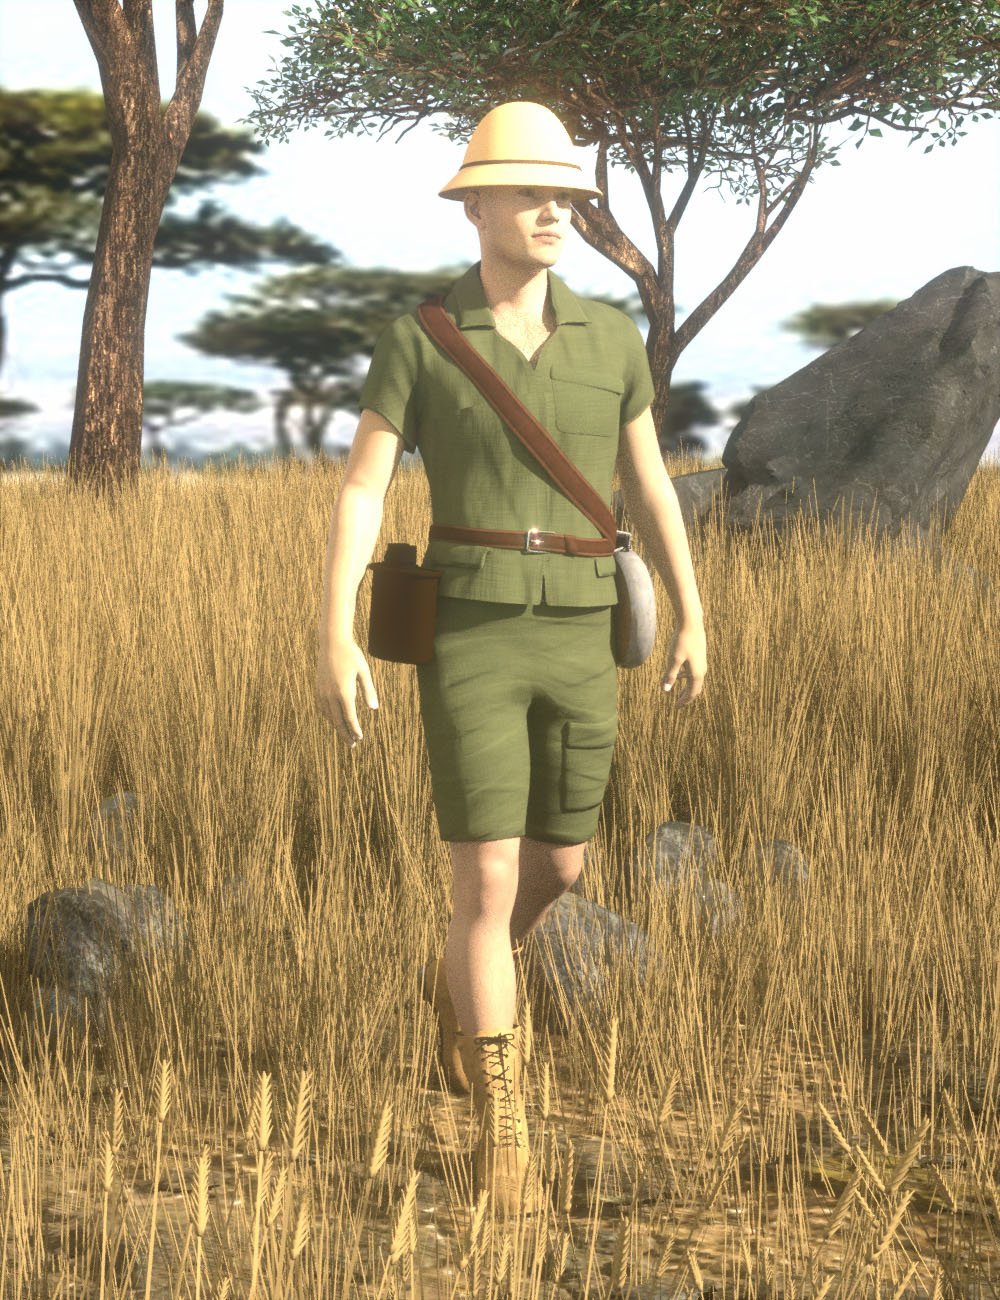 Expedition Africa Bundle by: AcharyaPolina, 3D Models by Daz 3D